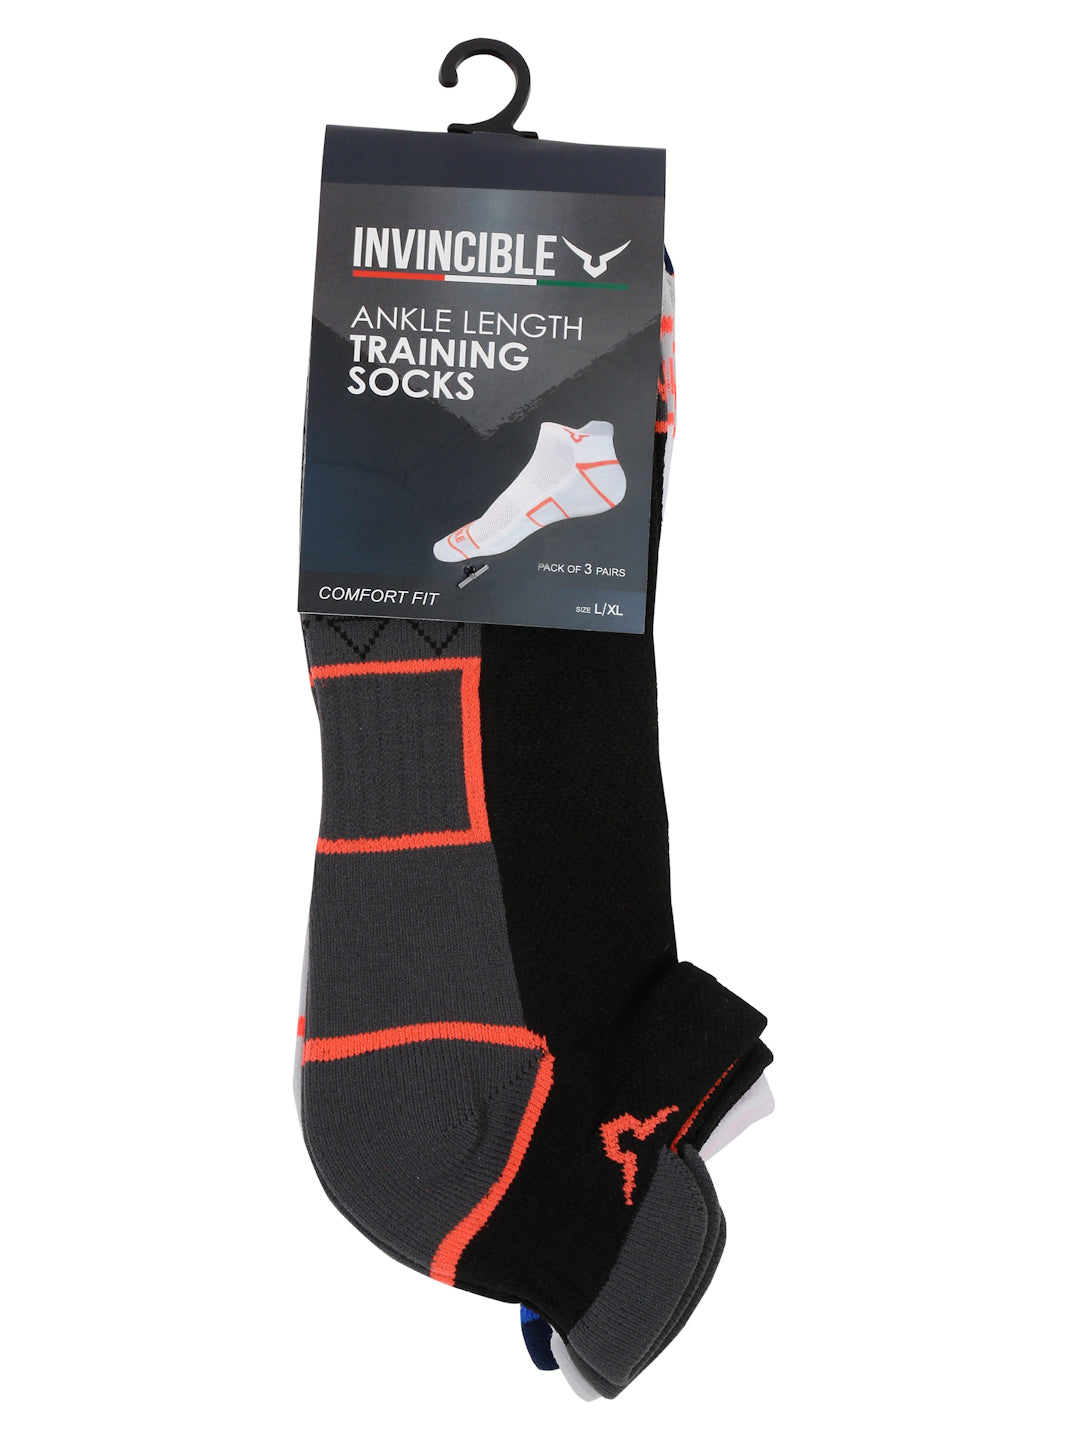 Invincible Ankle Length Socks Set of 3 Pairs